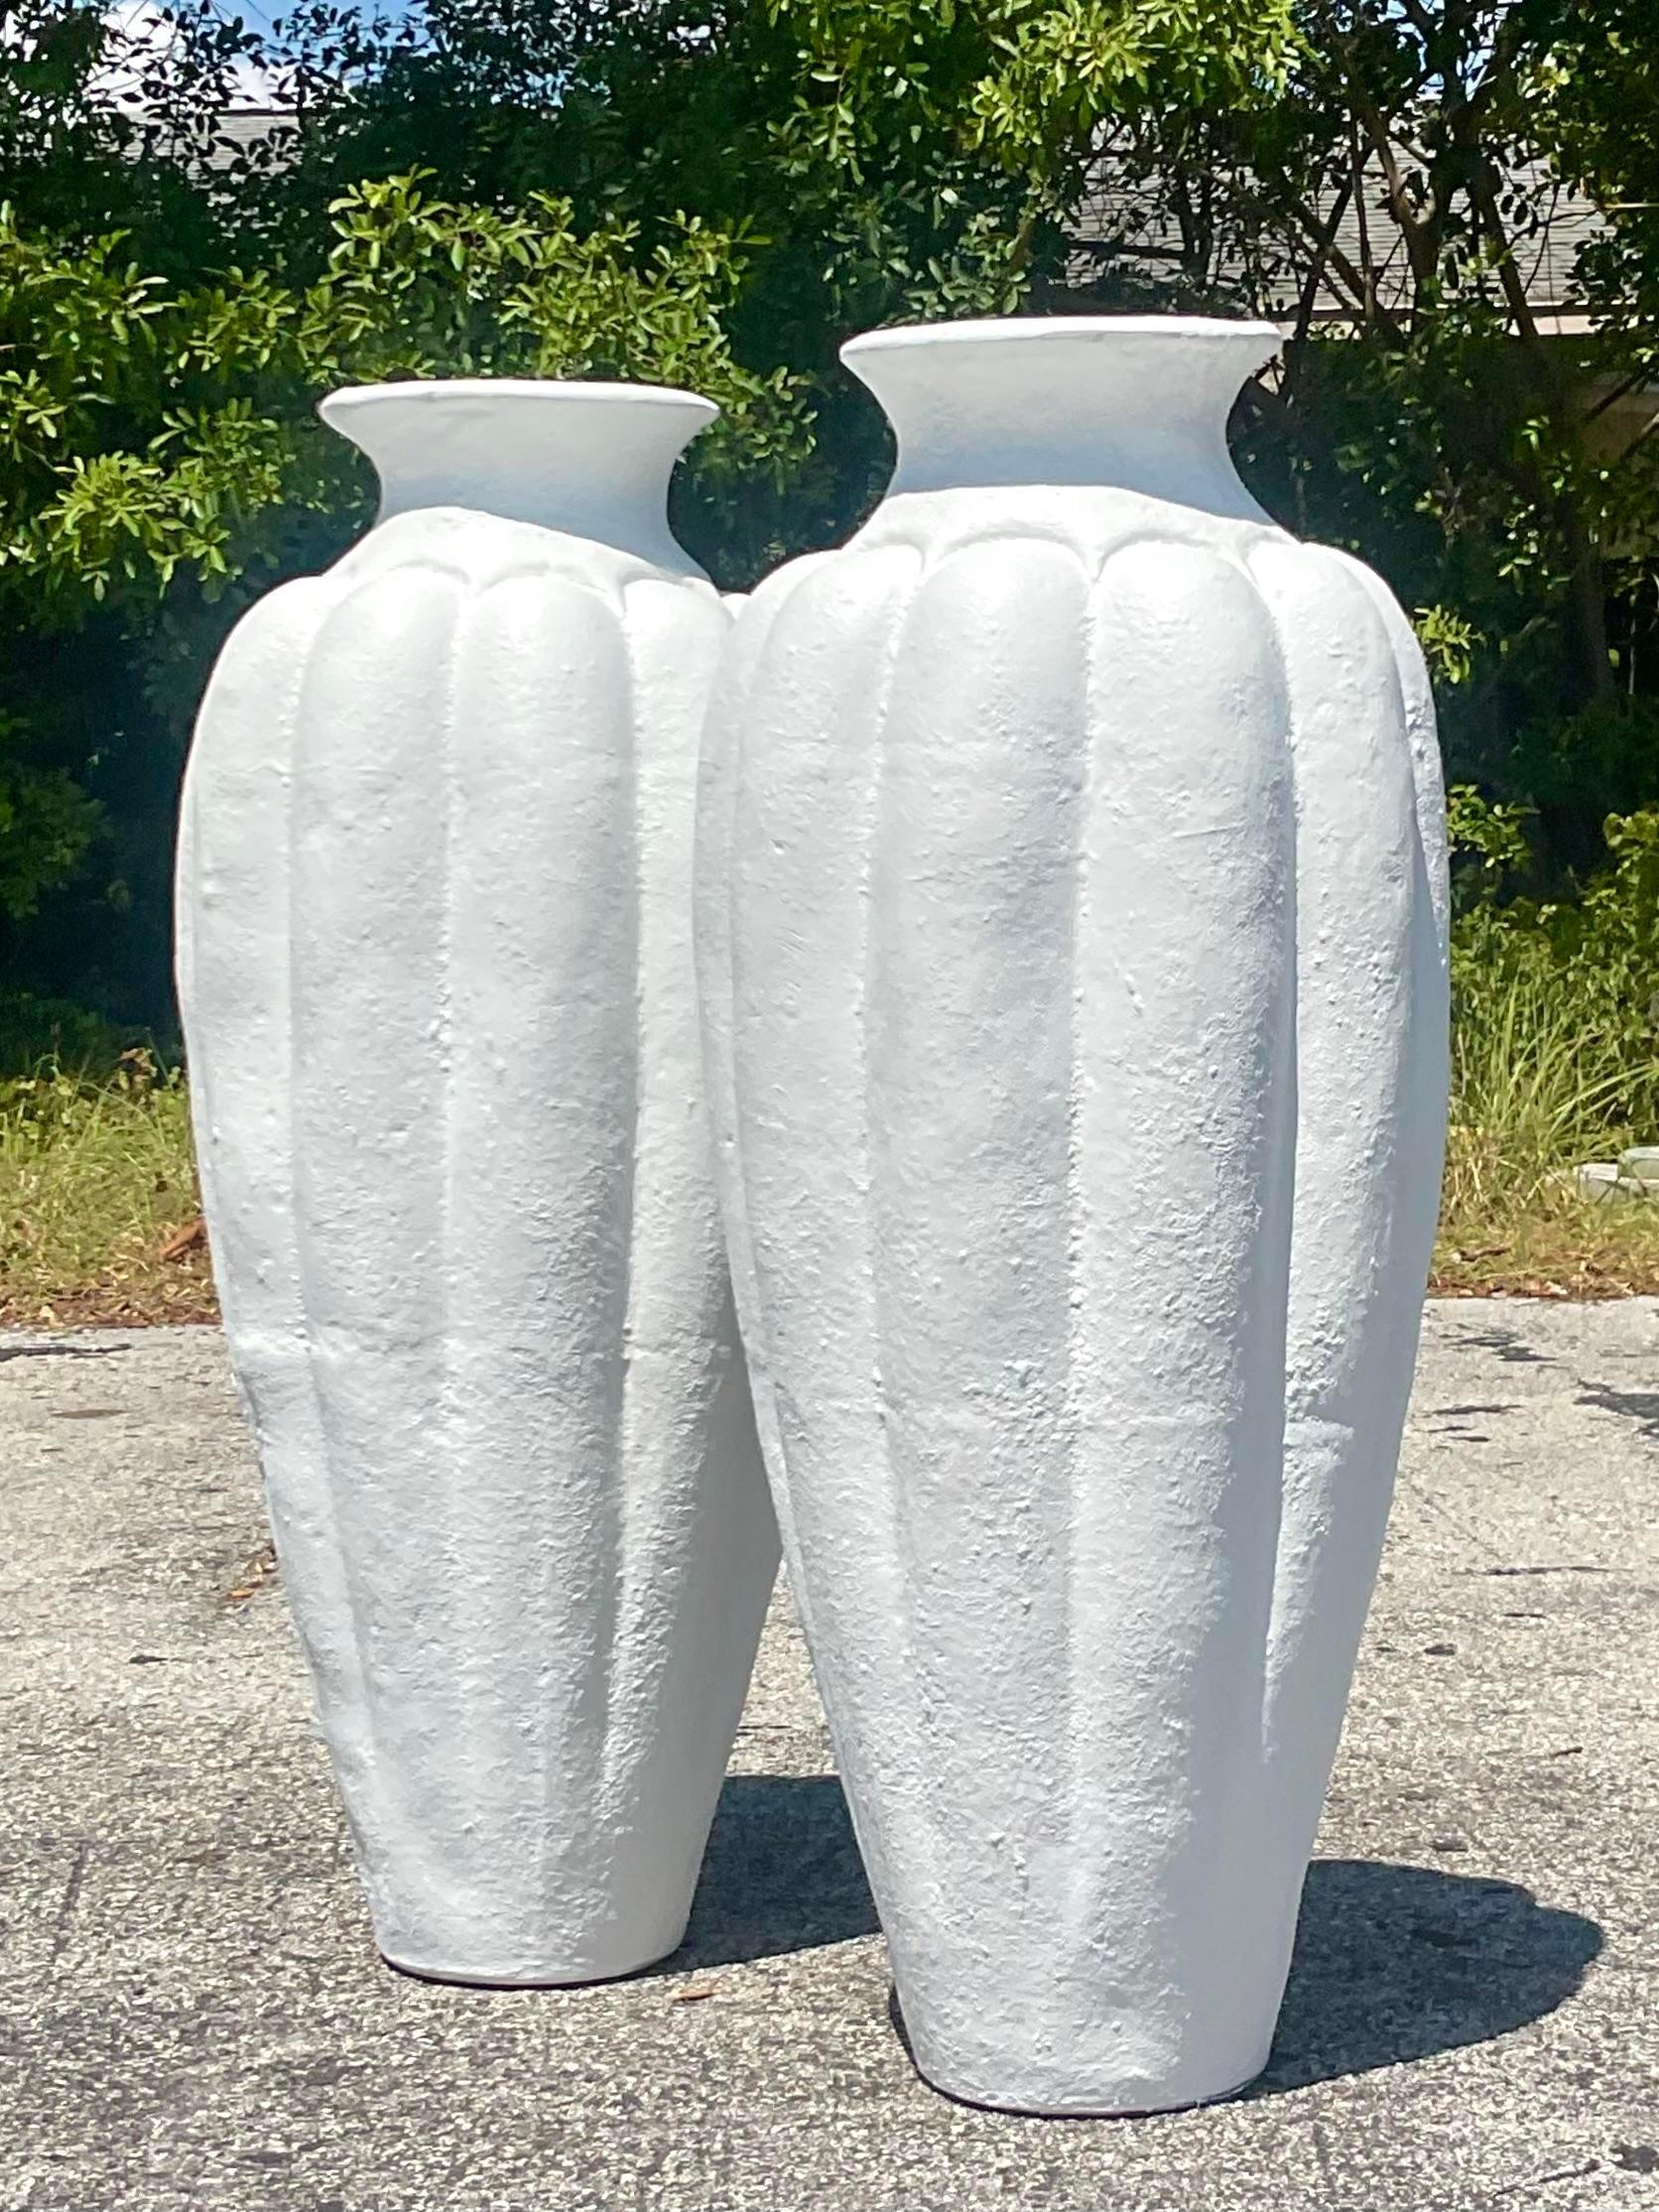 20th Century Vintage Plaster Over Terra Cotta Urns - a Pair For Sale